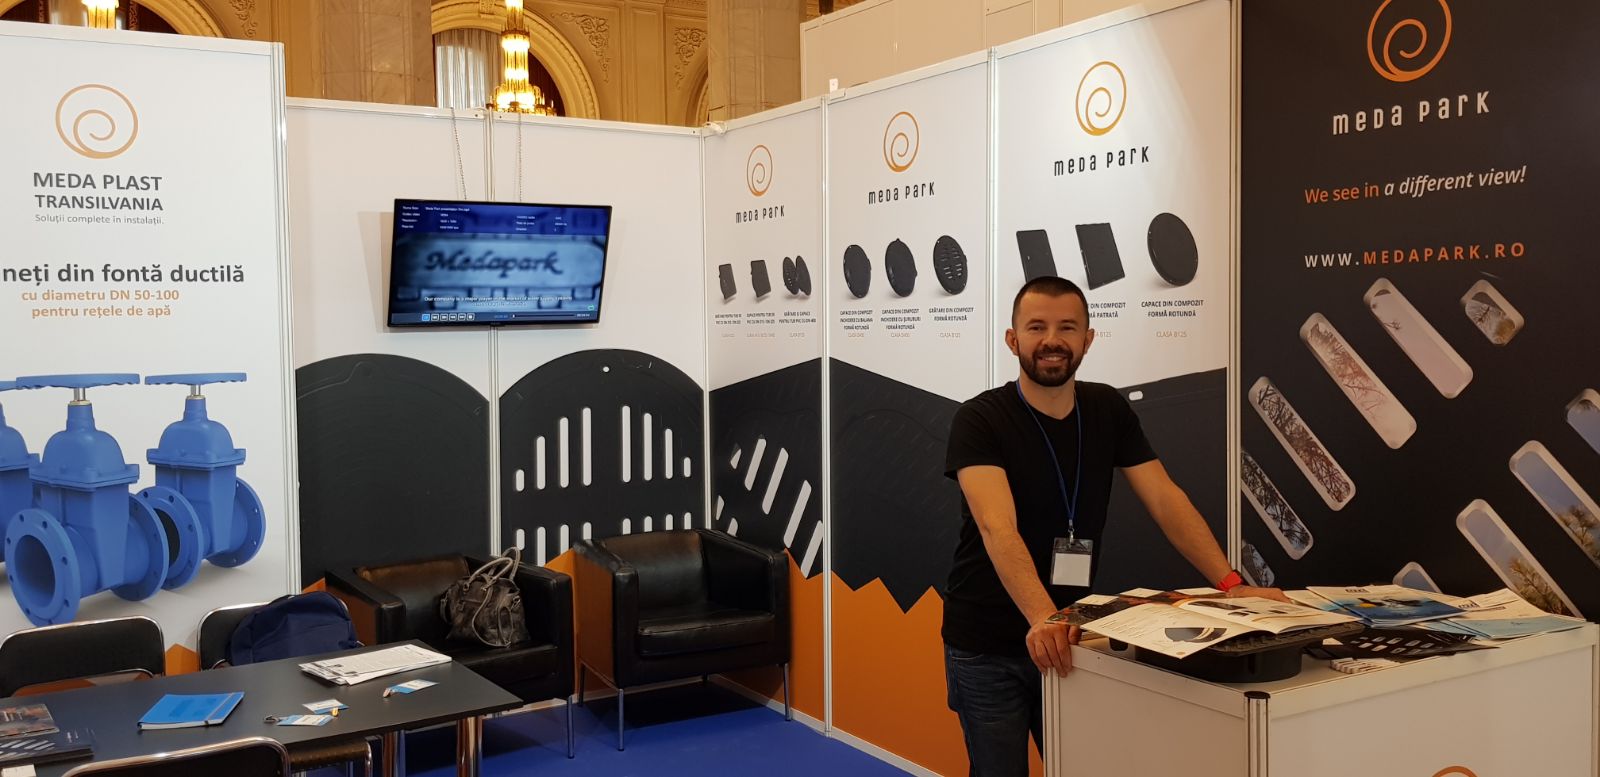 We participate at Expoapa 2018, 14 - 16 May, Bucharest